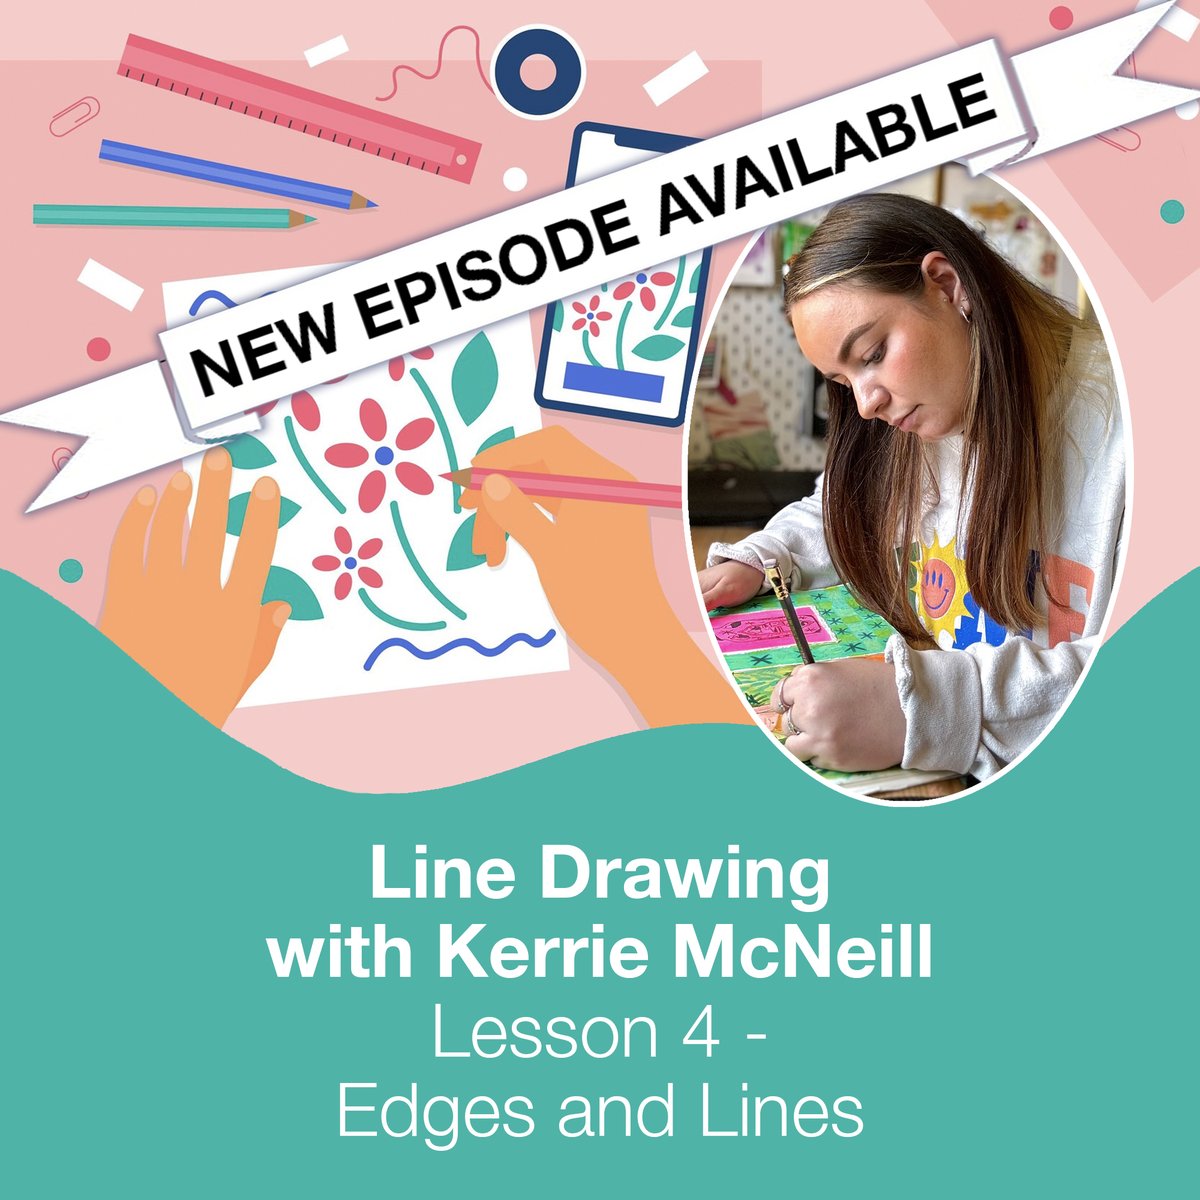 As we progress to the fourth session of the Give it a Go Line Drawing series, Kerrie McNeill, also known as Kerrie Illustrates, delves into the intricate world of edges and lines. ✍️ Watch now 👉 tinyurl.com/tw-lnidrawalong